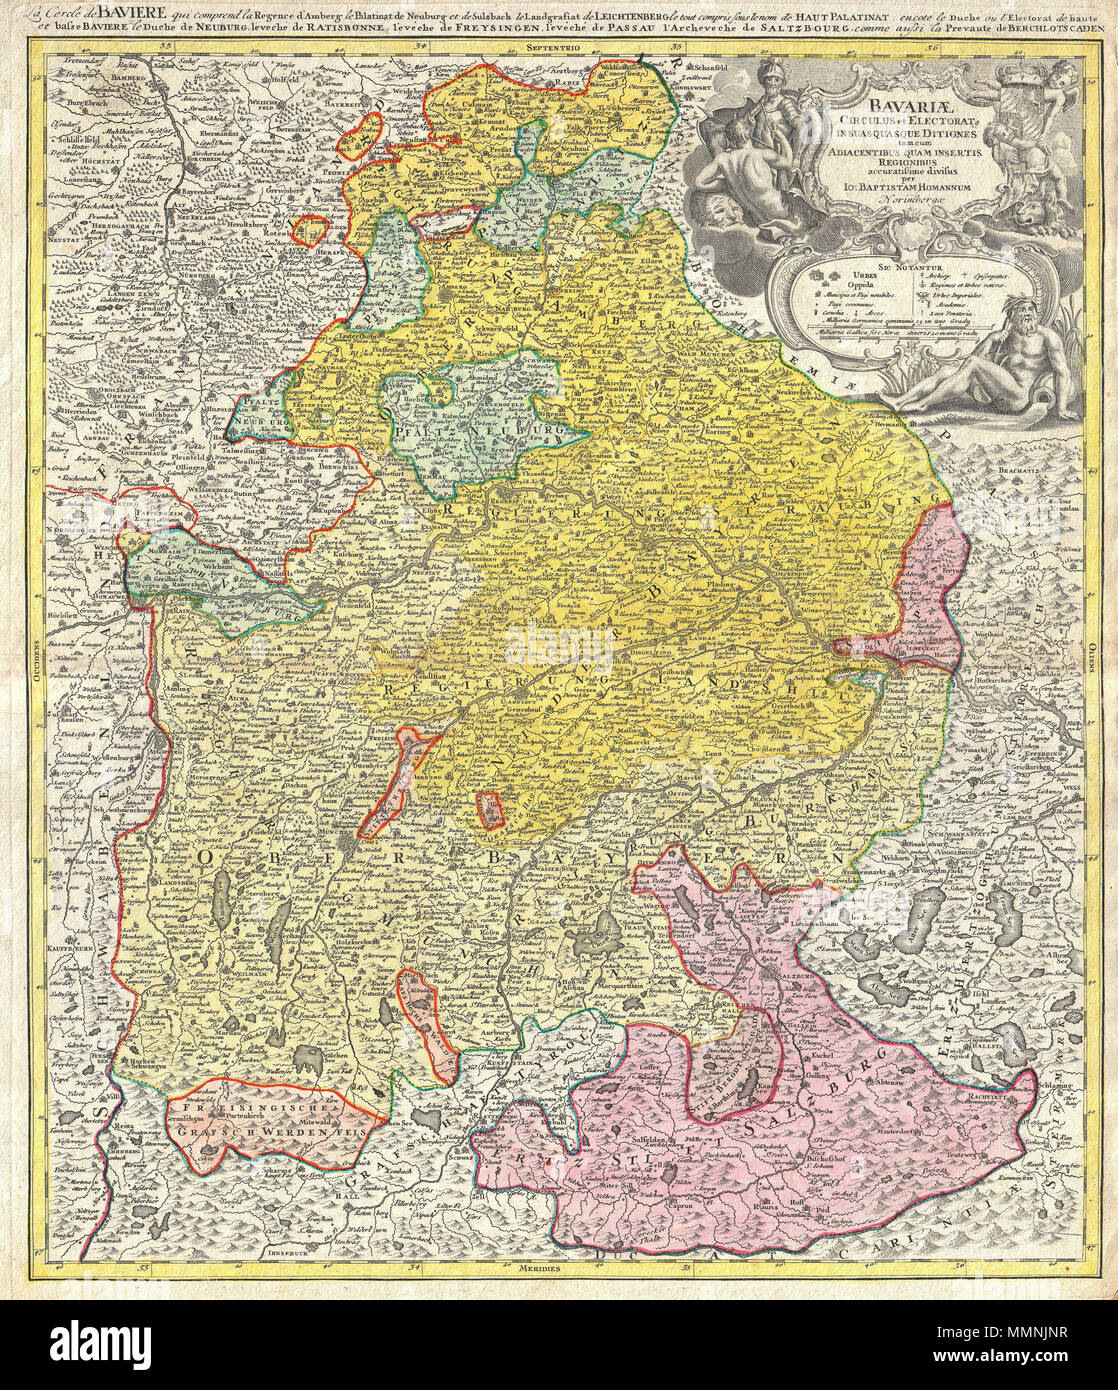 .  English: This is a rare and attractive map of Bavaria, Germany. Covers from Rabiz as far south as Innsbruck, including Munich, Salzburg, Passau, Bamberg, Nuremberg and Augsburg. Detail includes cities, forts, some topographical features, and districts. Stunning decorative title cartouche in the upper right quadrant featuring soldiers, cherubs, greed gods, and armorial decorations. Additional title, in French, in upper margin La cercle de Baviere, qui comprend la regence d'Amberg … Prepared by J.B. Homann and issued as plate no. 10 in Homann Heirs’ Maior Atlas Scholasticus. Deutsch: Karte vo Stock Photo